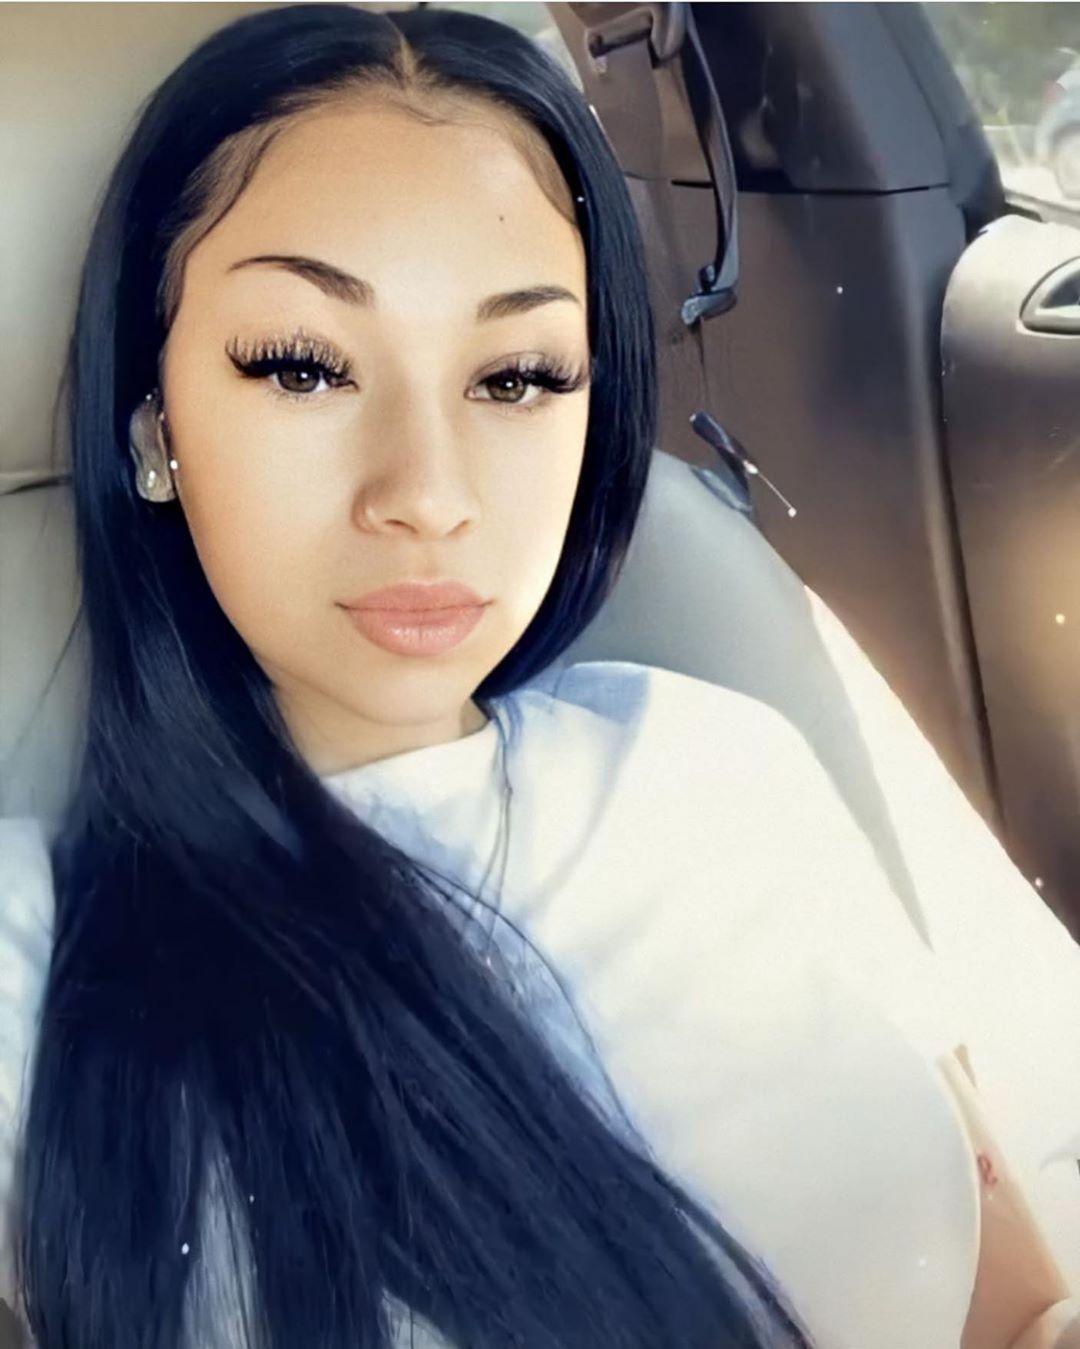 17-Year-Old Bhad Bhabie Enters Rehab For Prescription Pills: ‘Promised To Return Better’